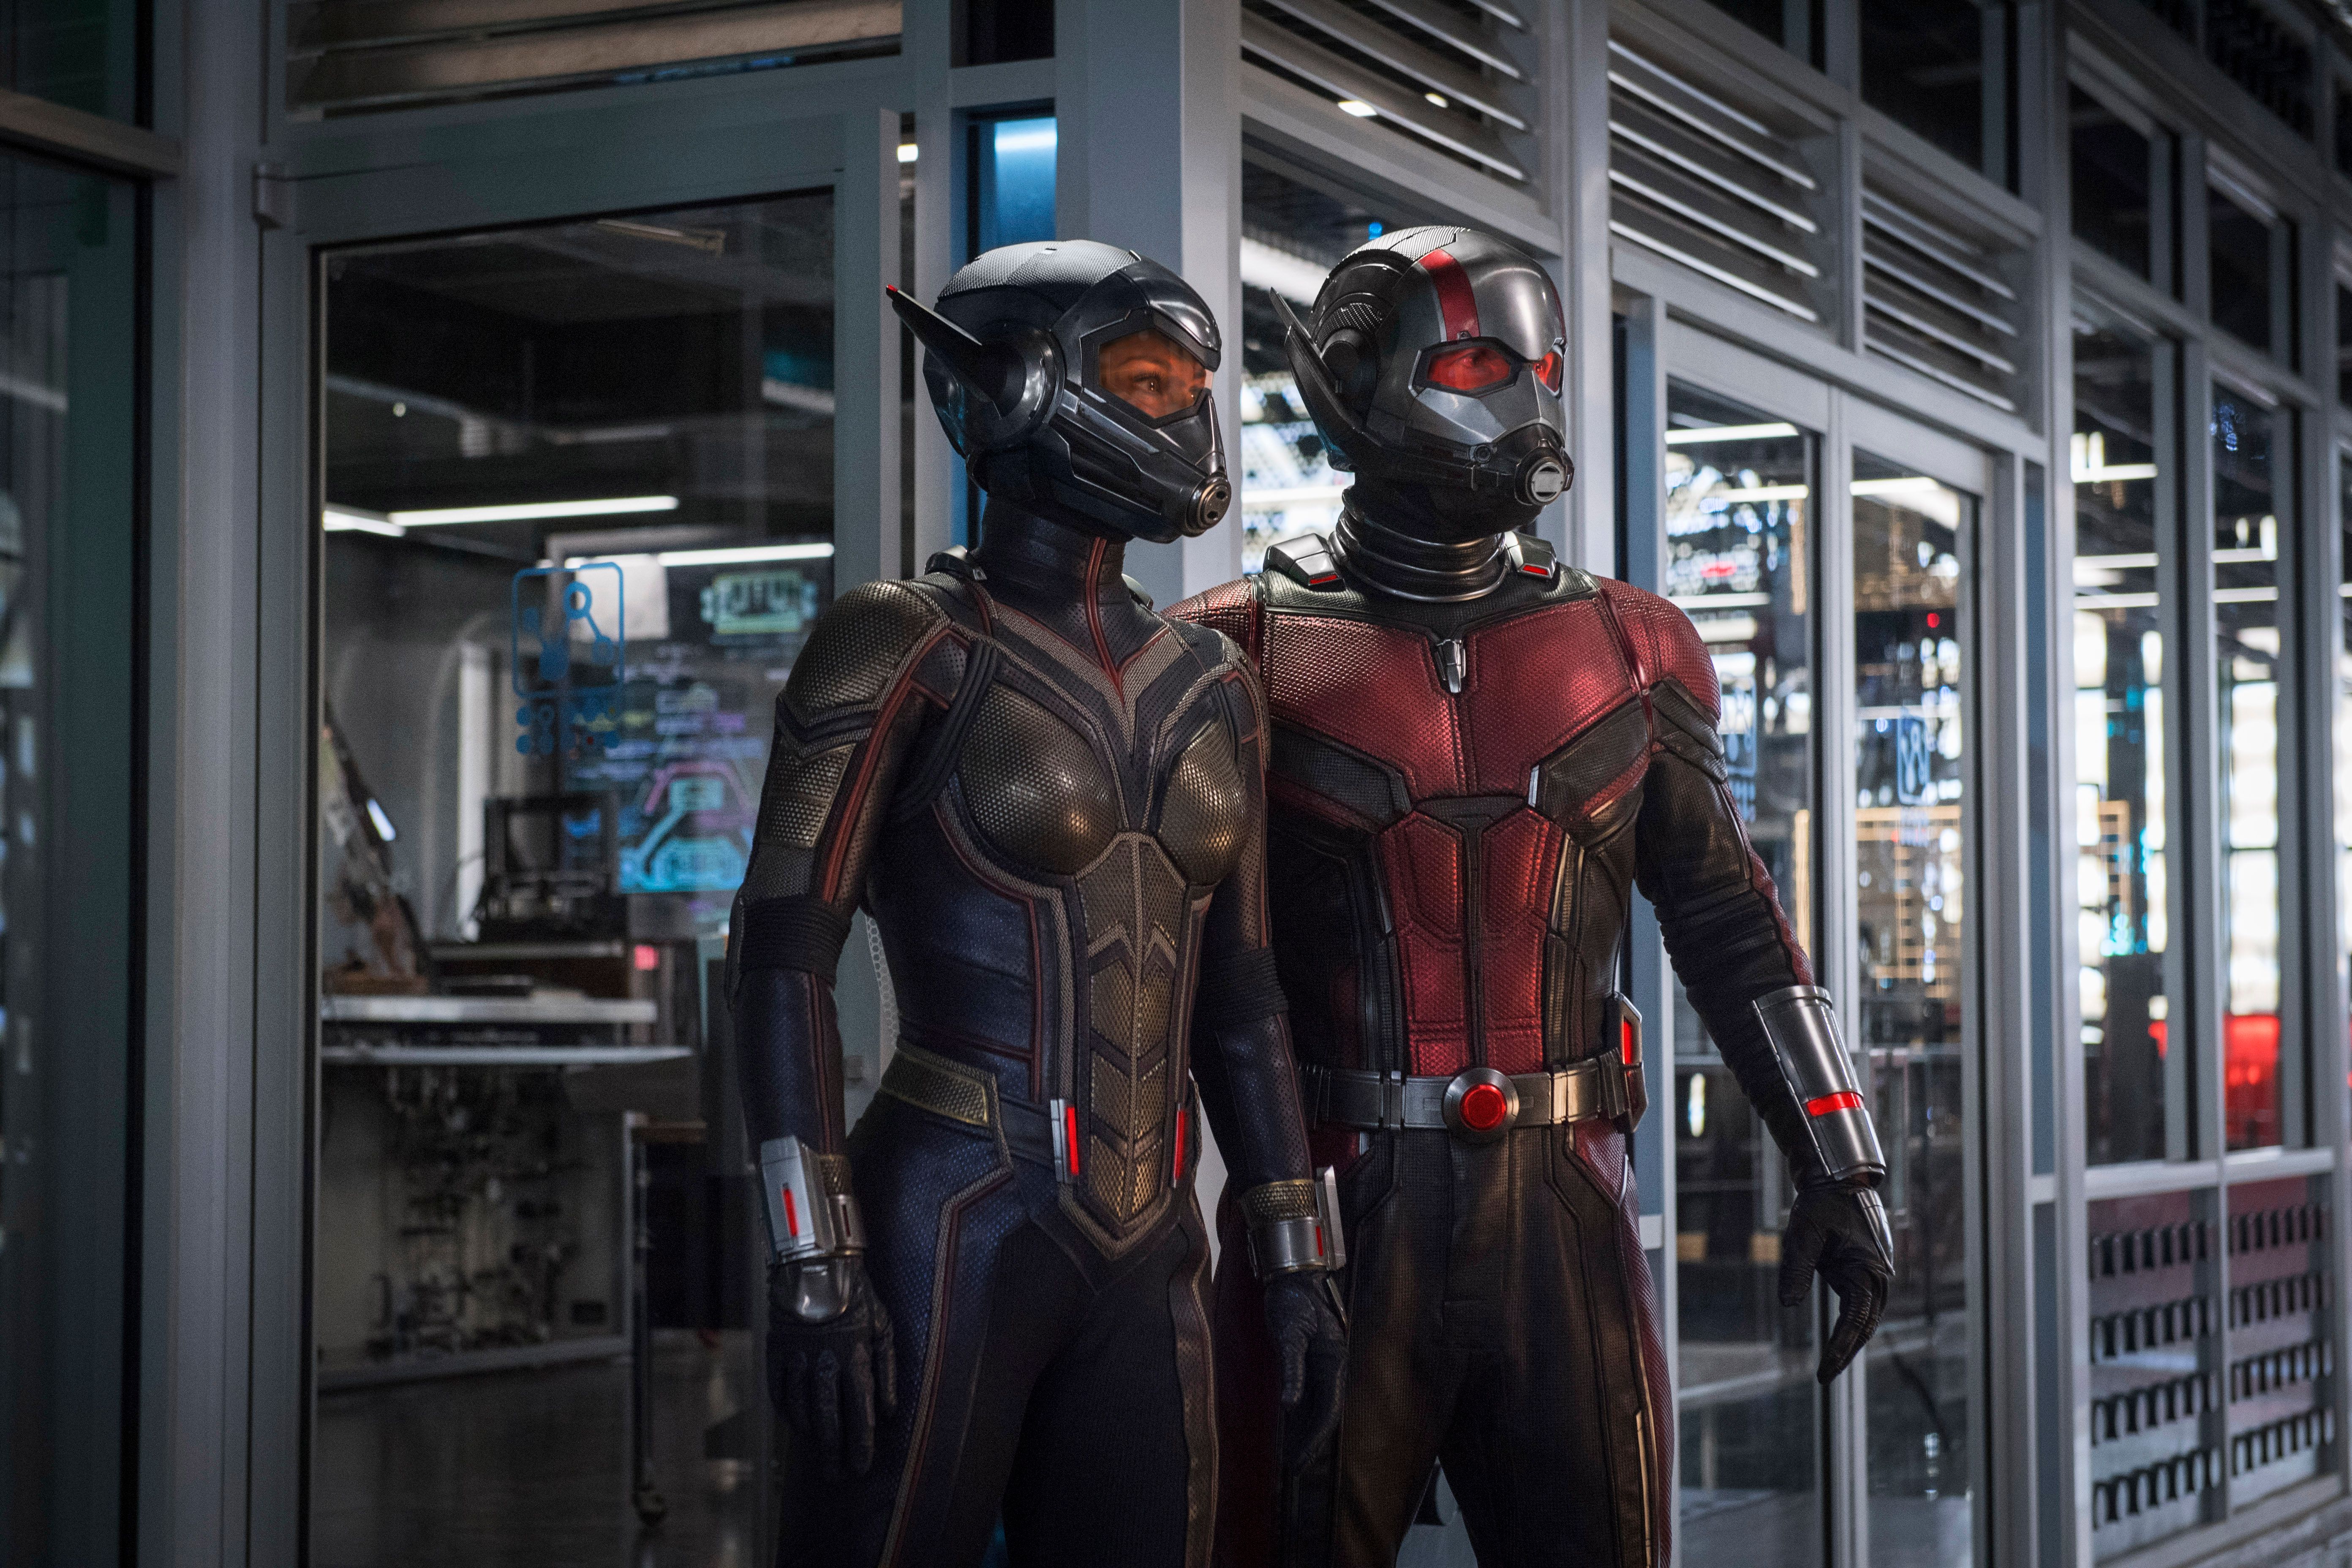 ant-man-and-the-wasp-evangeline-lilly-paul-rudd.jpg